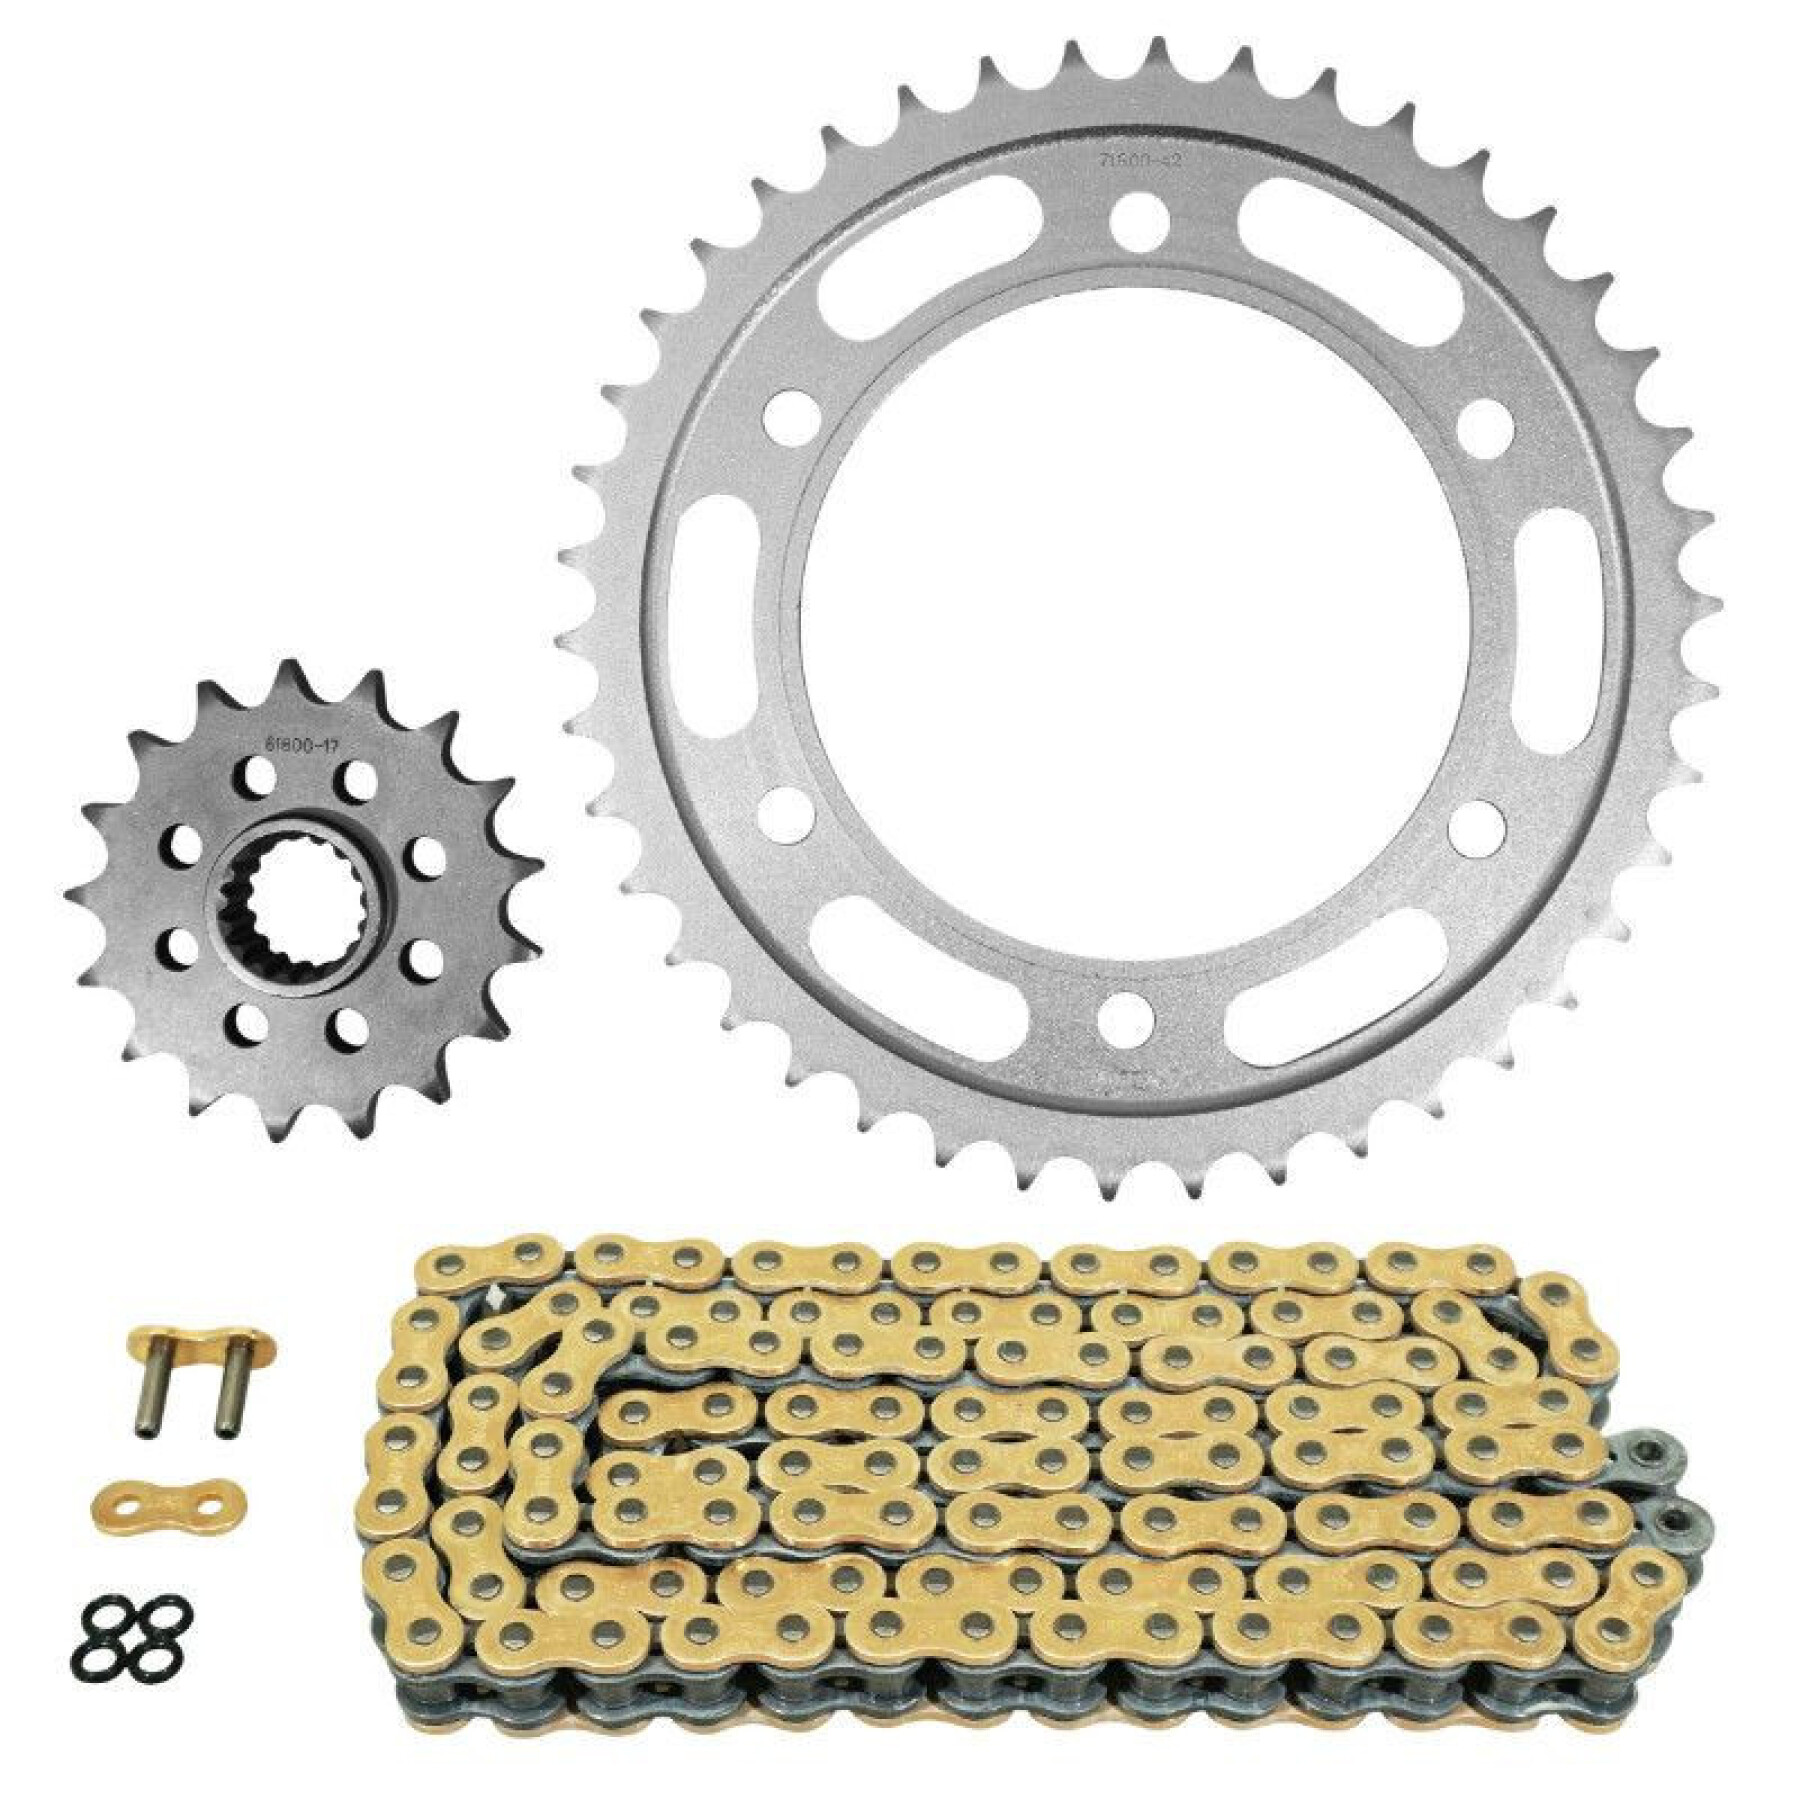 Motorcycle chain kit Afam Ktm 1190 Adventure Abs 2013>2016, R Adventure R Abs 2013>2016 525